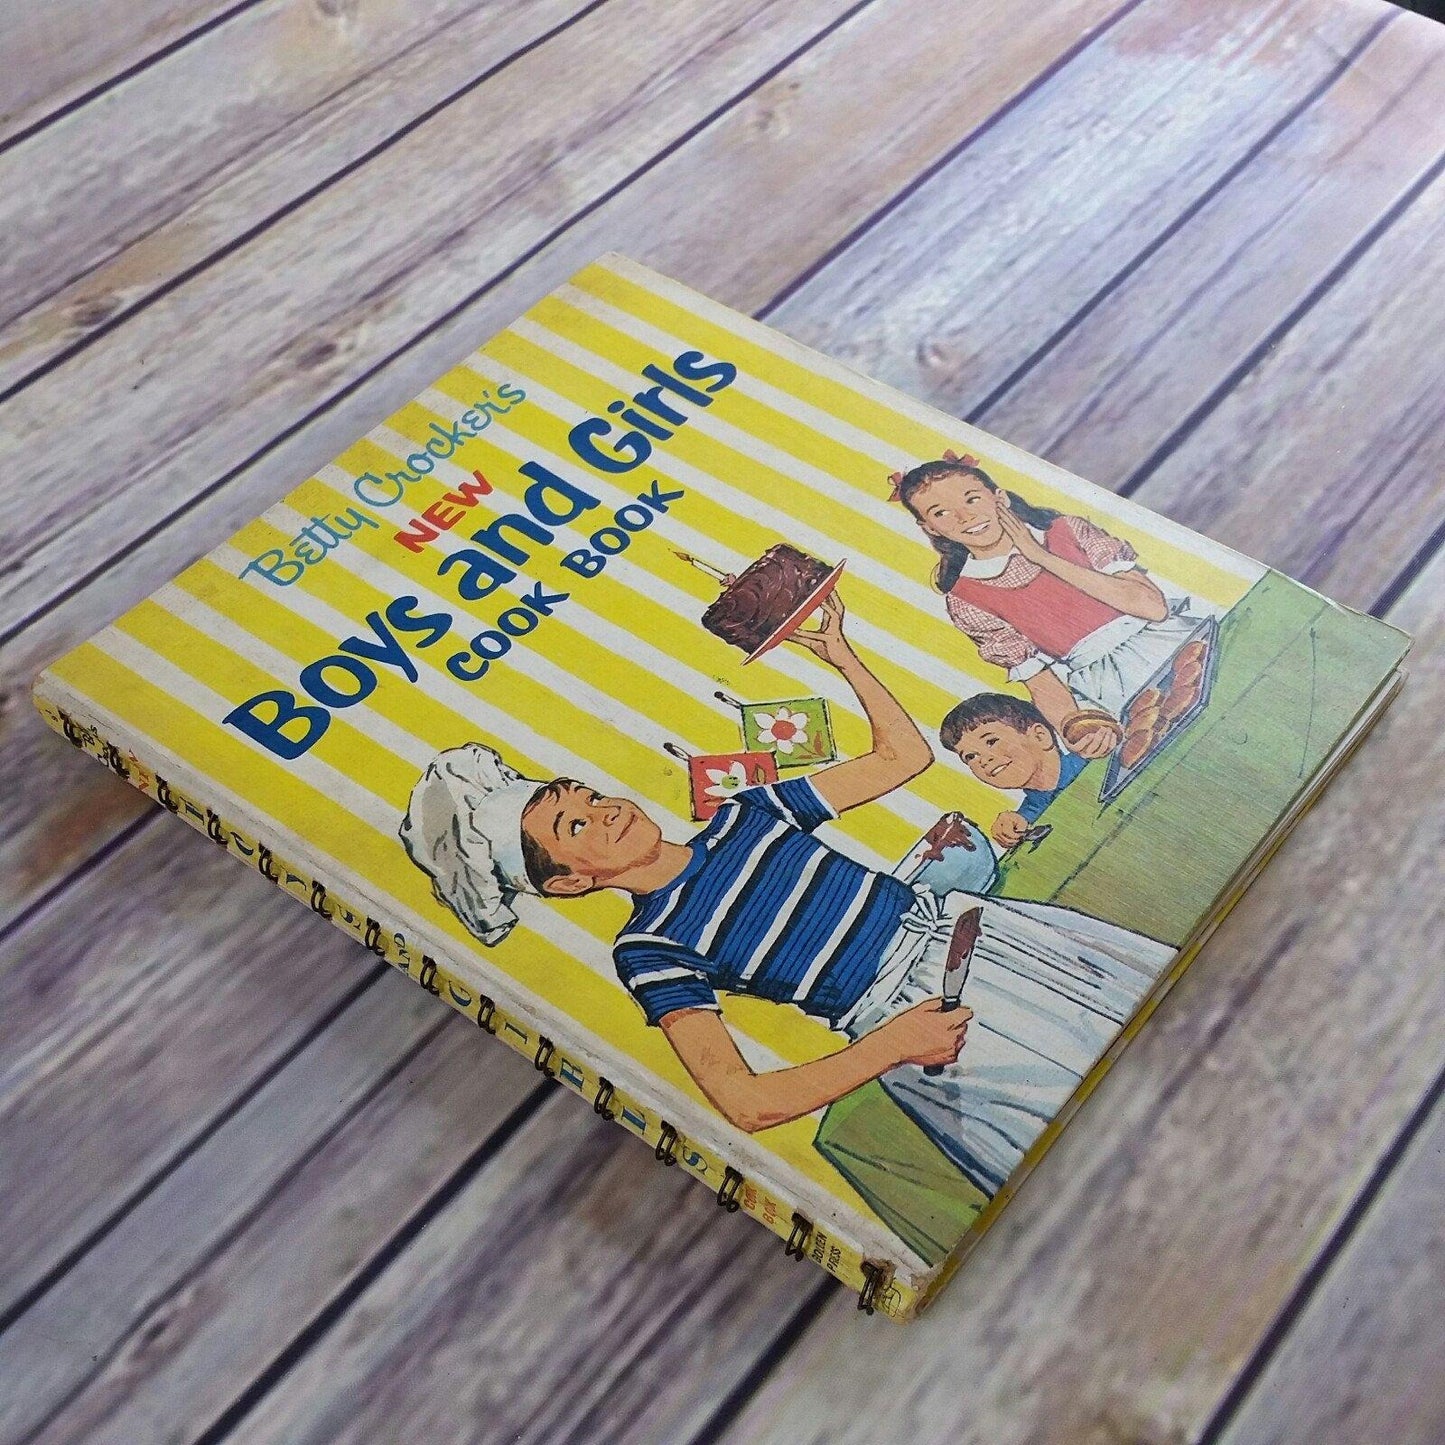 Vintage Betty Crocker Cook Book For Boys and Girls 1965 1st Edition 2nd Printing Spiral Bound Hardcover